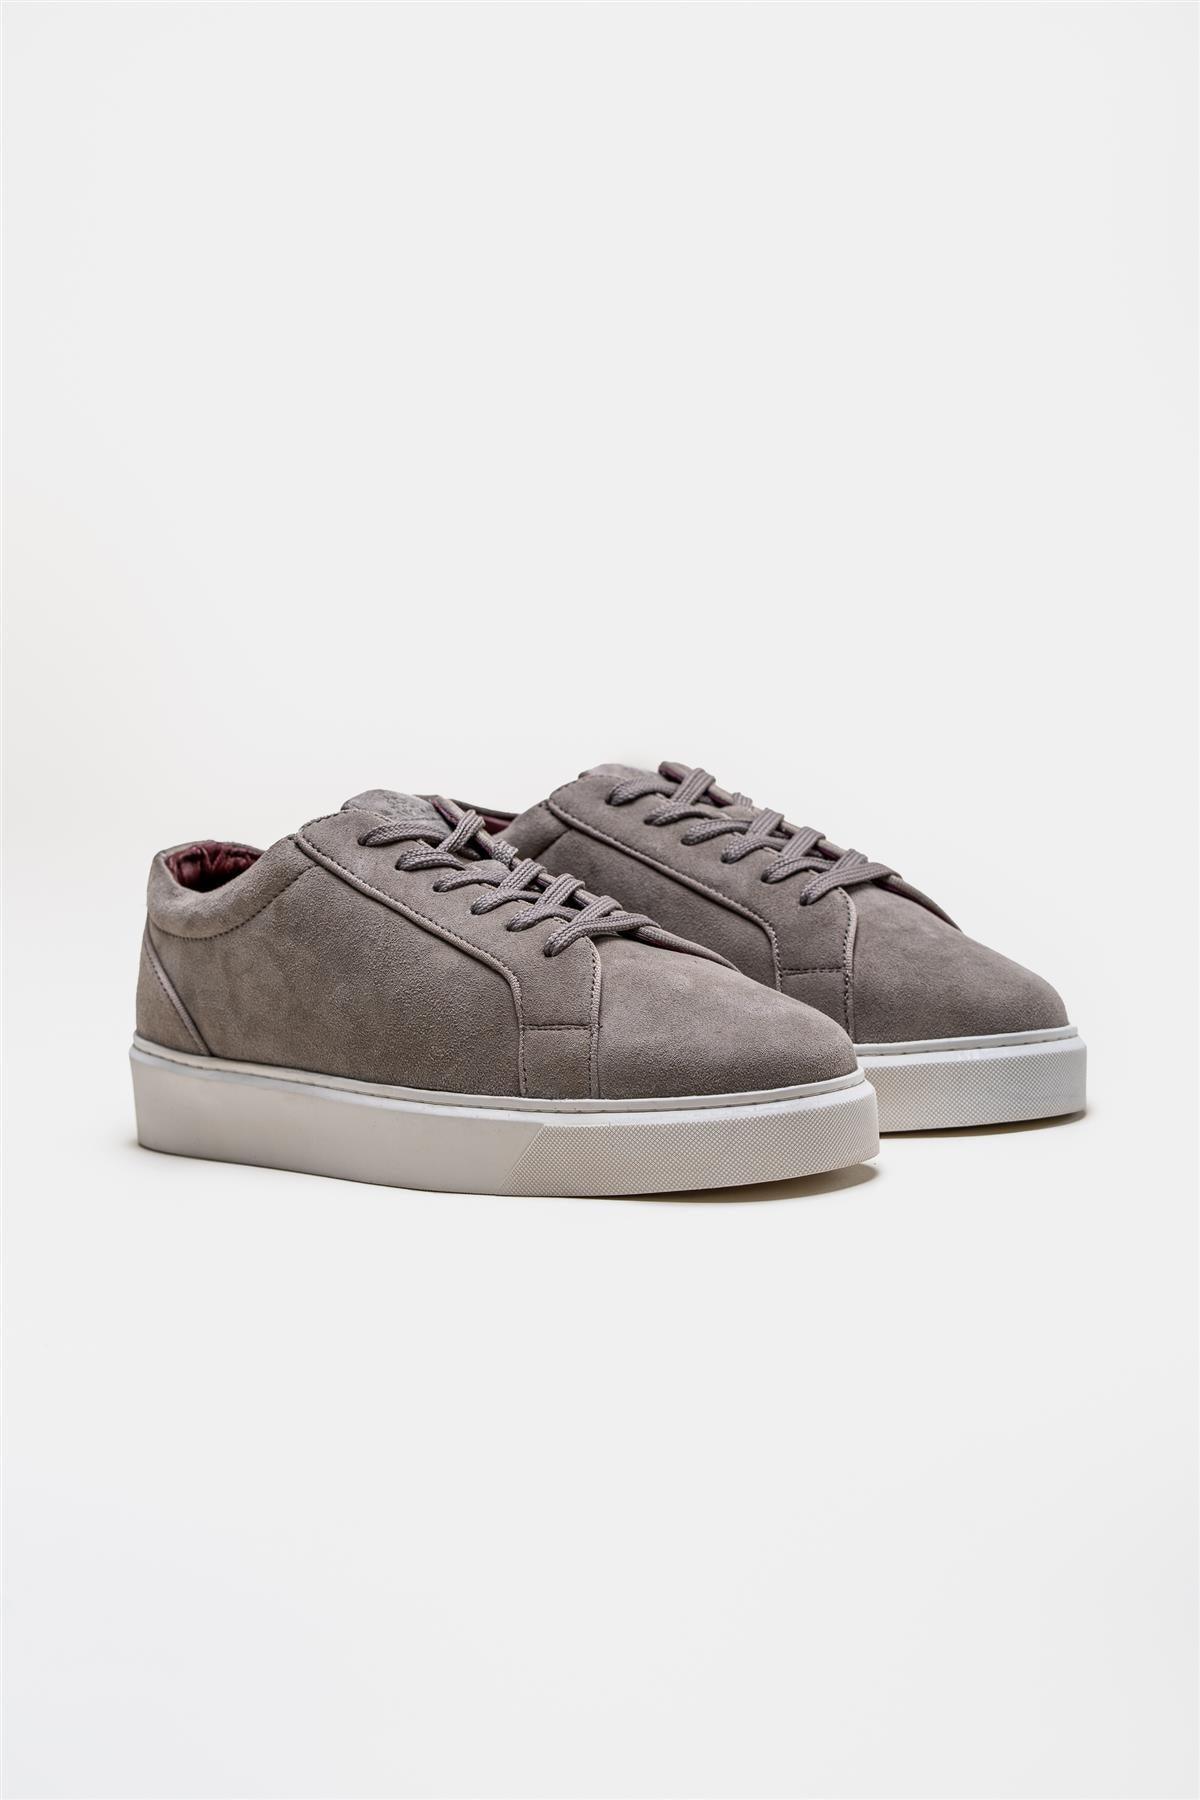 P50 stone sneaker front